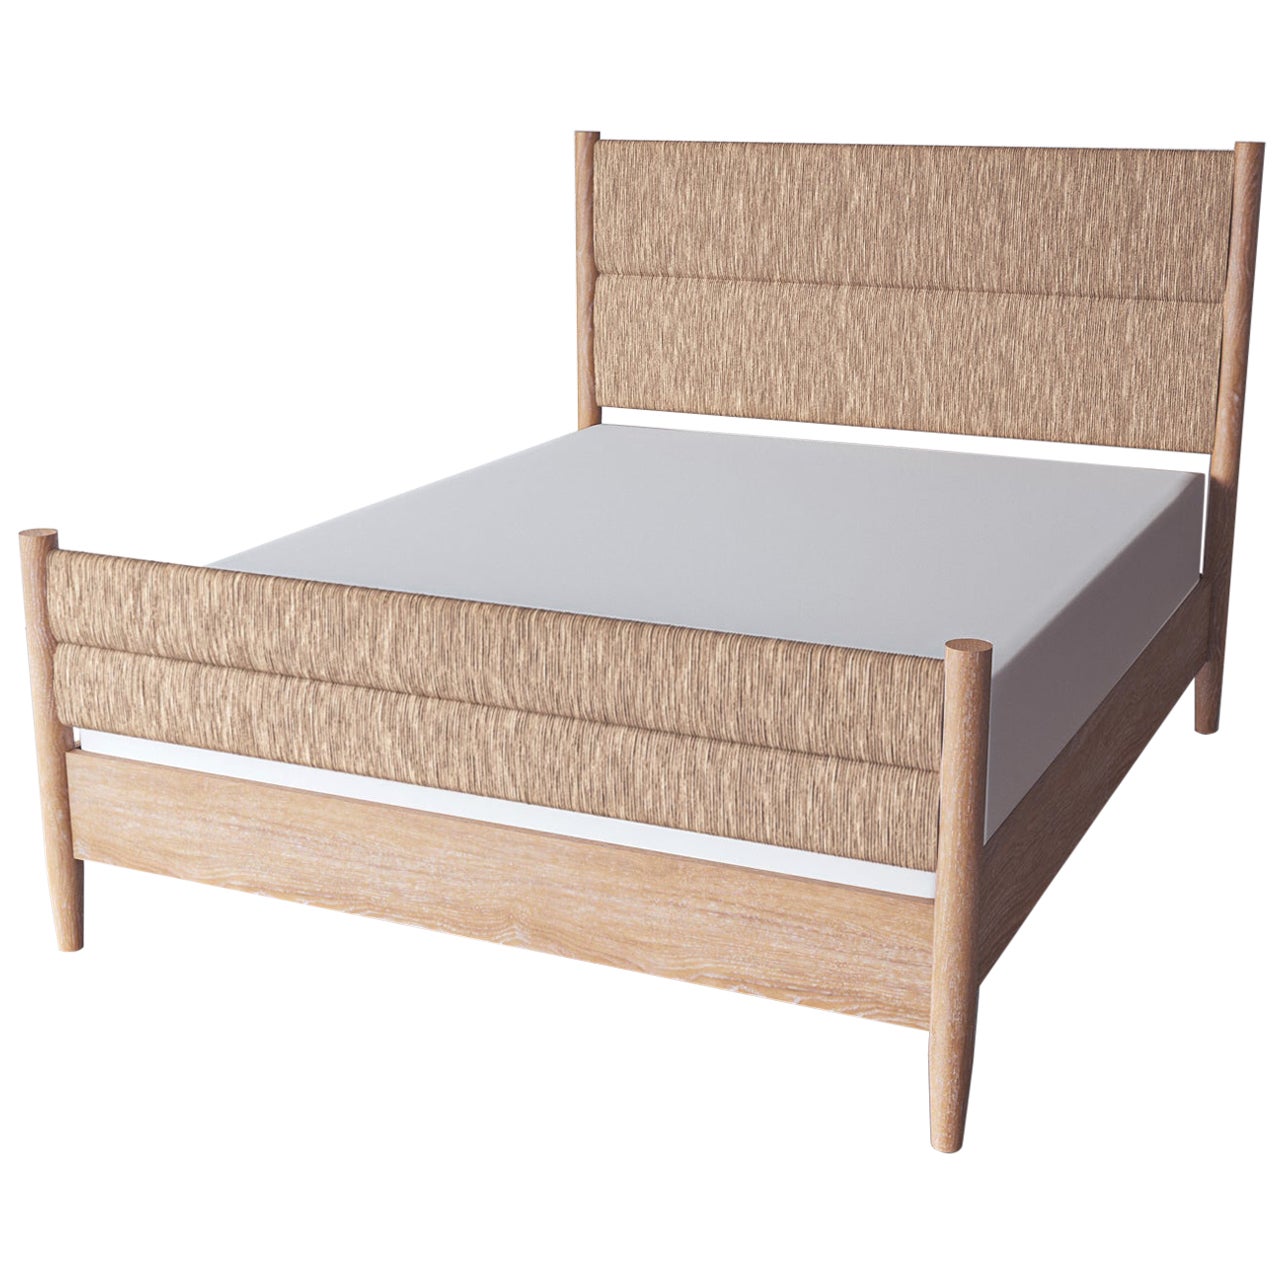 "Perronet" Rush Weave and French Oak Bed Frame 'Queen' by Christiane Lemieux